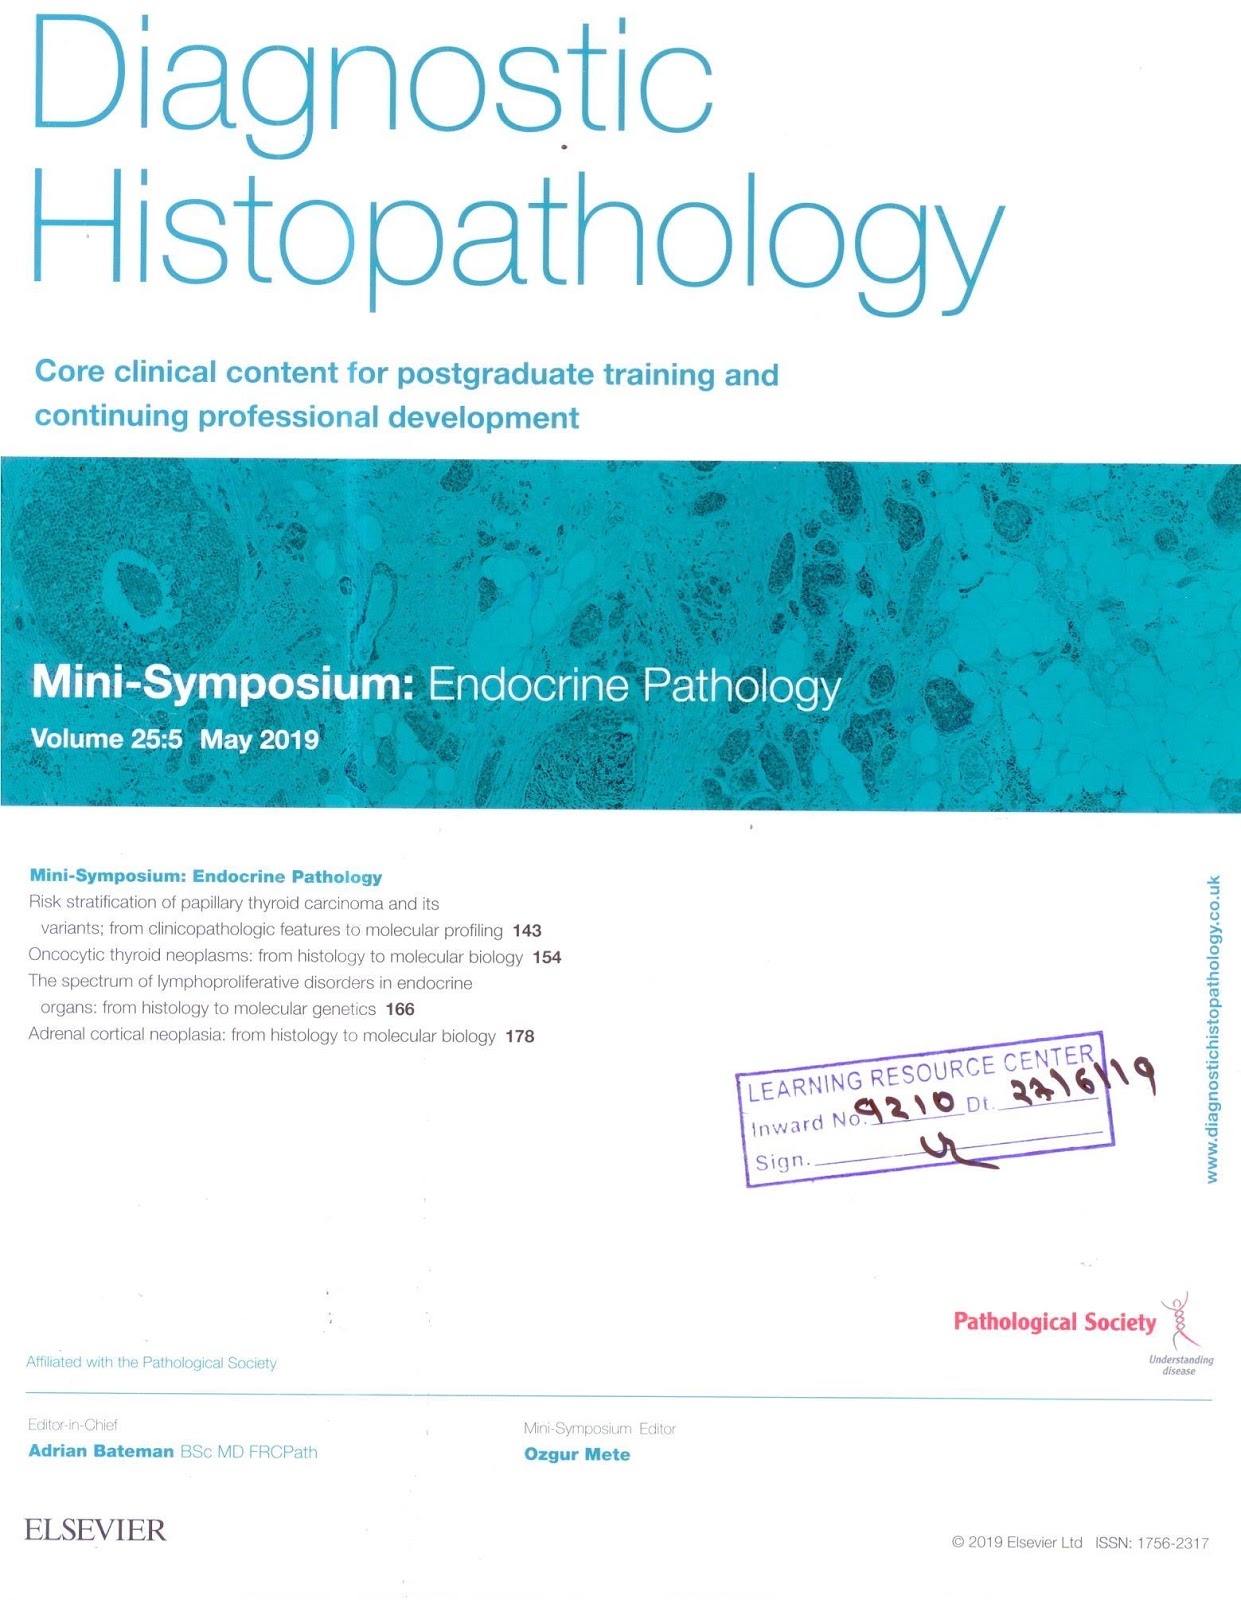 https://www.sciencedirect.com/journal/diagnostic-histopathology/vol/25/issue/5